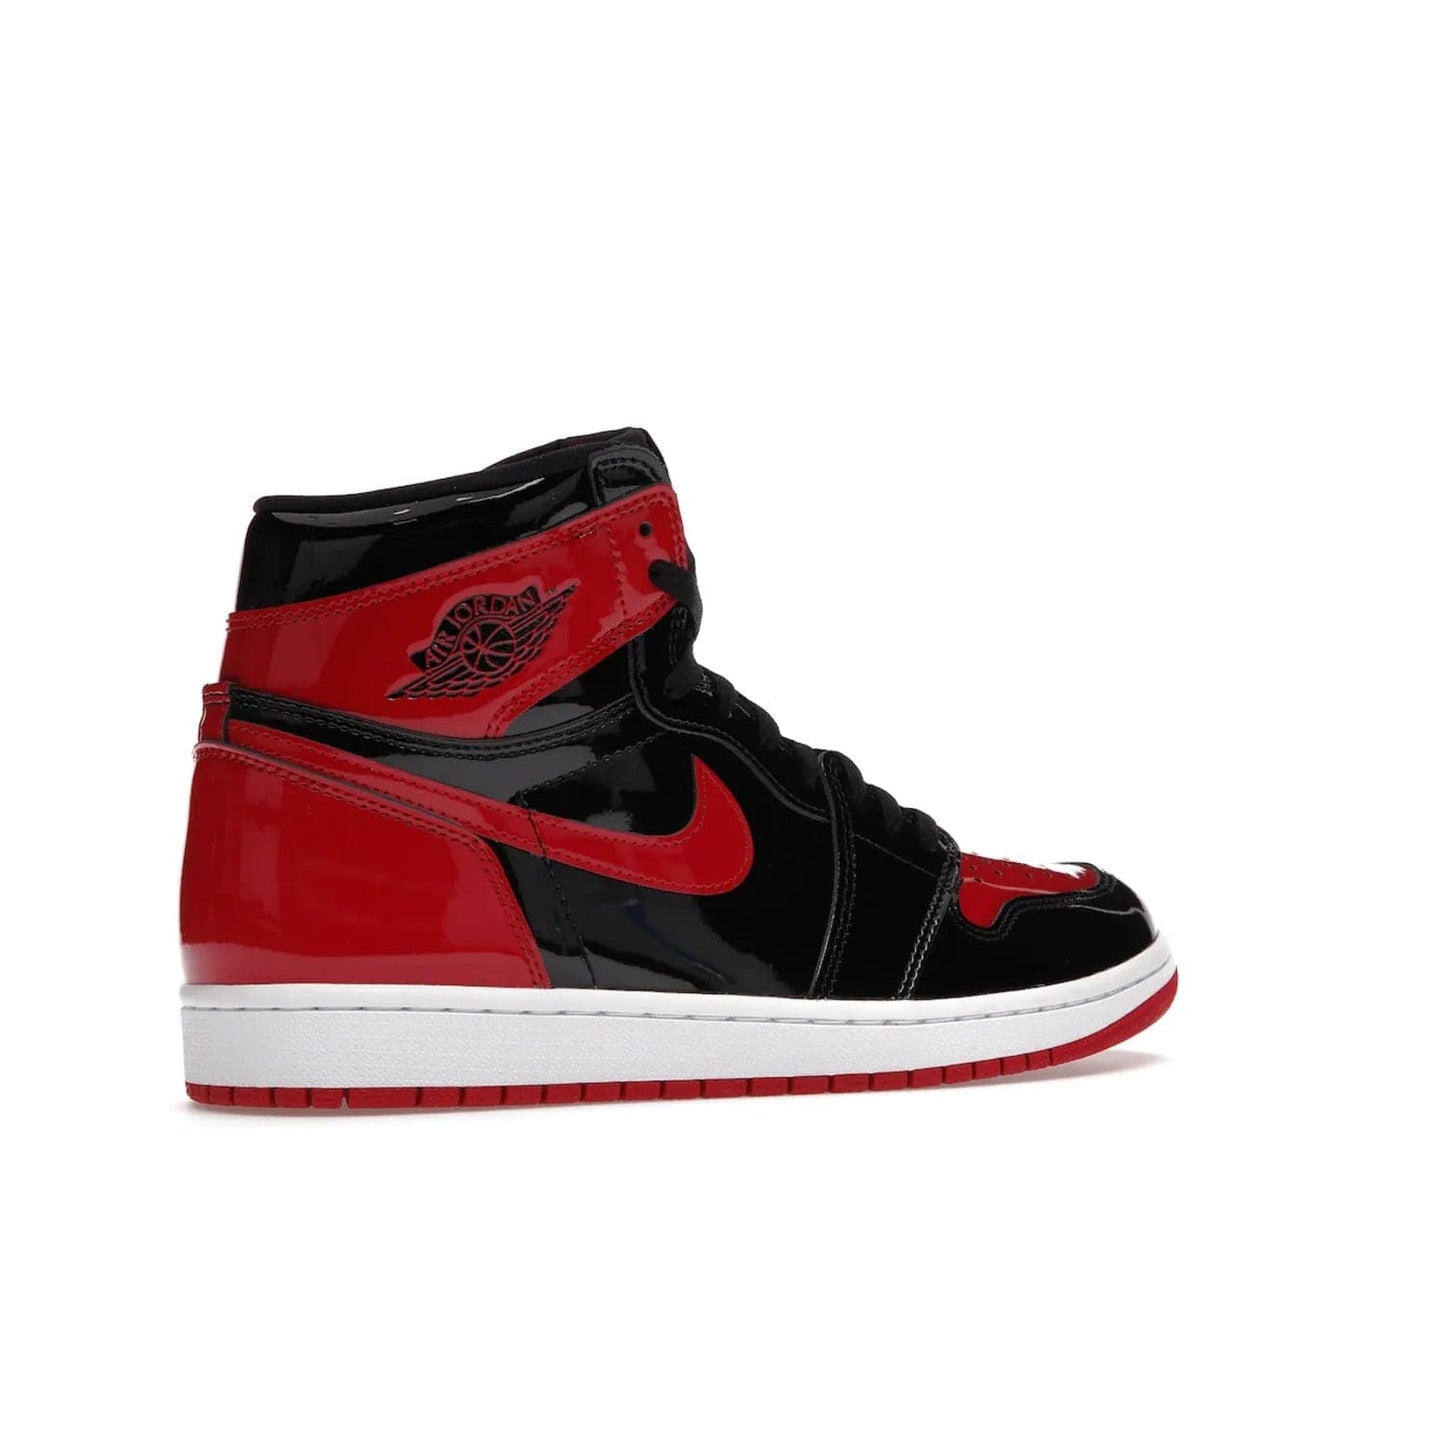 Jordan 1 Retro High OG Patent Bred - Image 34 - Only at www.BallersClubKickz.com - Introducing Air Jordan 1 Retro High OG Patent Bred - sleek patent leather upper, signature weaved Nike Air tongue and classic Wings logo on collar. Red and white sole complete signature look. Releasing December 2021 - perfect retro edition for holidays.